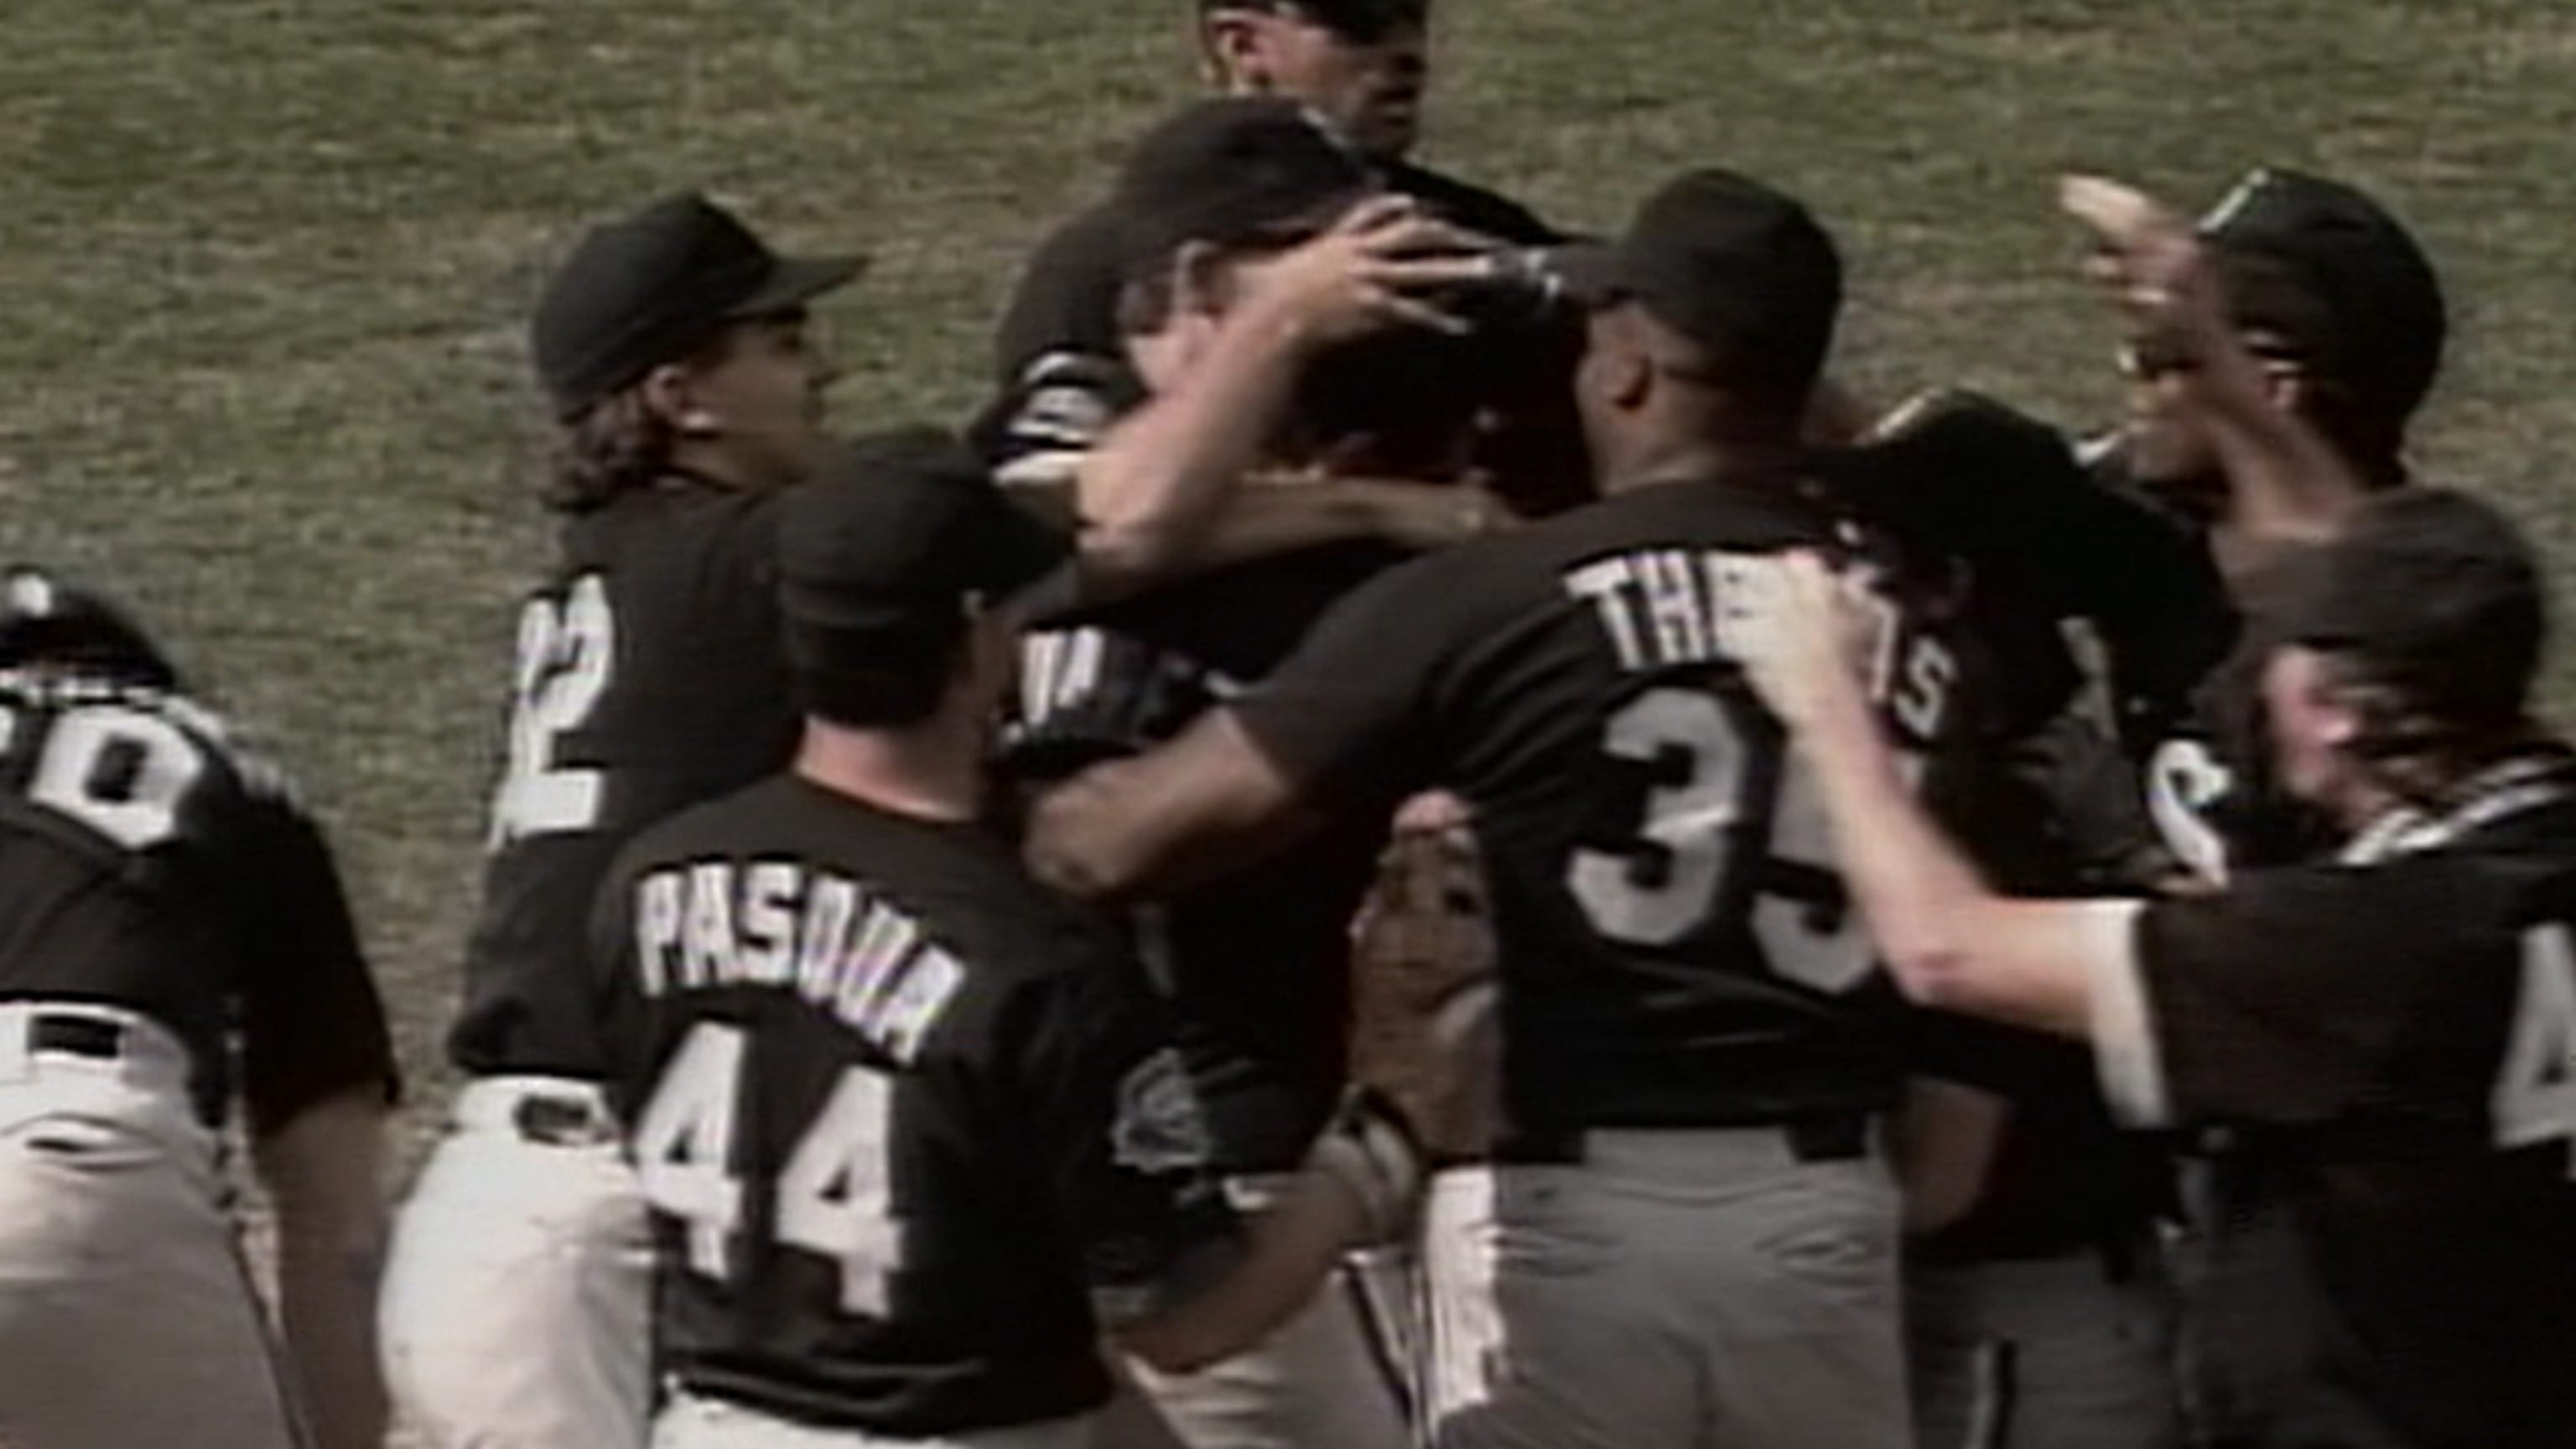 Chicago White Sox - “It was the most comfortable – not the prettiest –  uniform I ever wore,” said Harold Baines, who made his major-league debut  wearing the blue and white uniforms. “